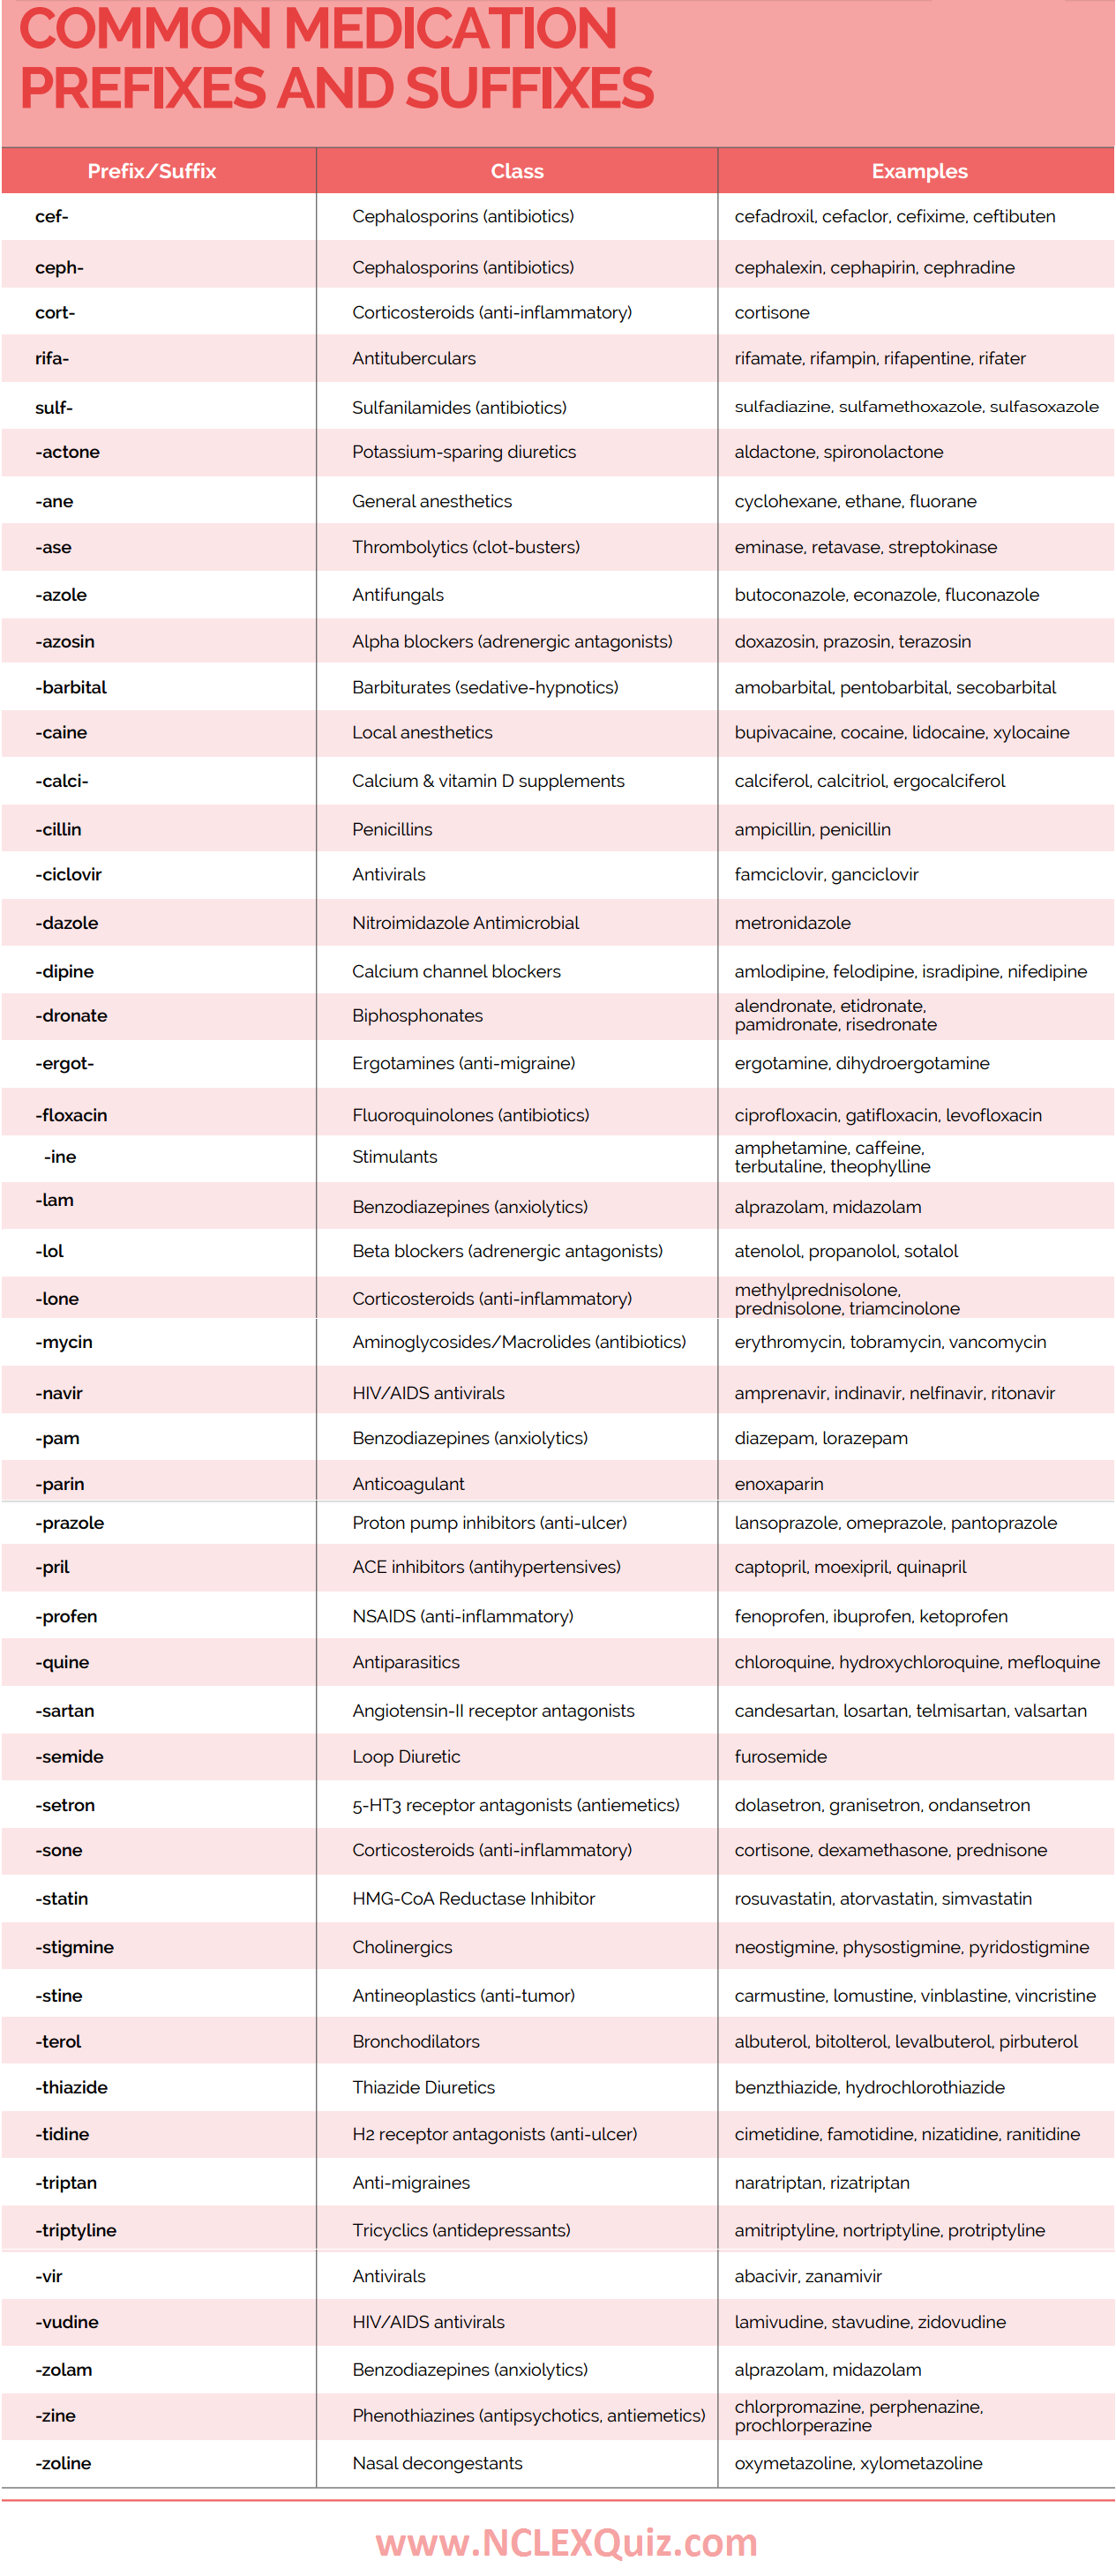 Common Medication Prefixes and Suffixes